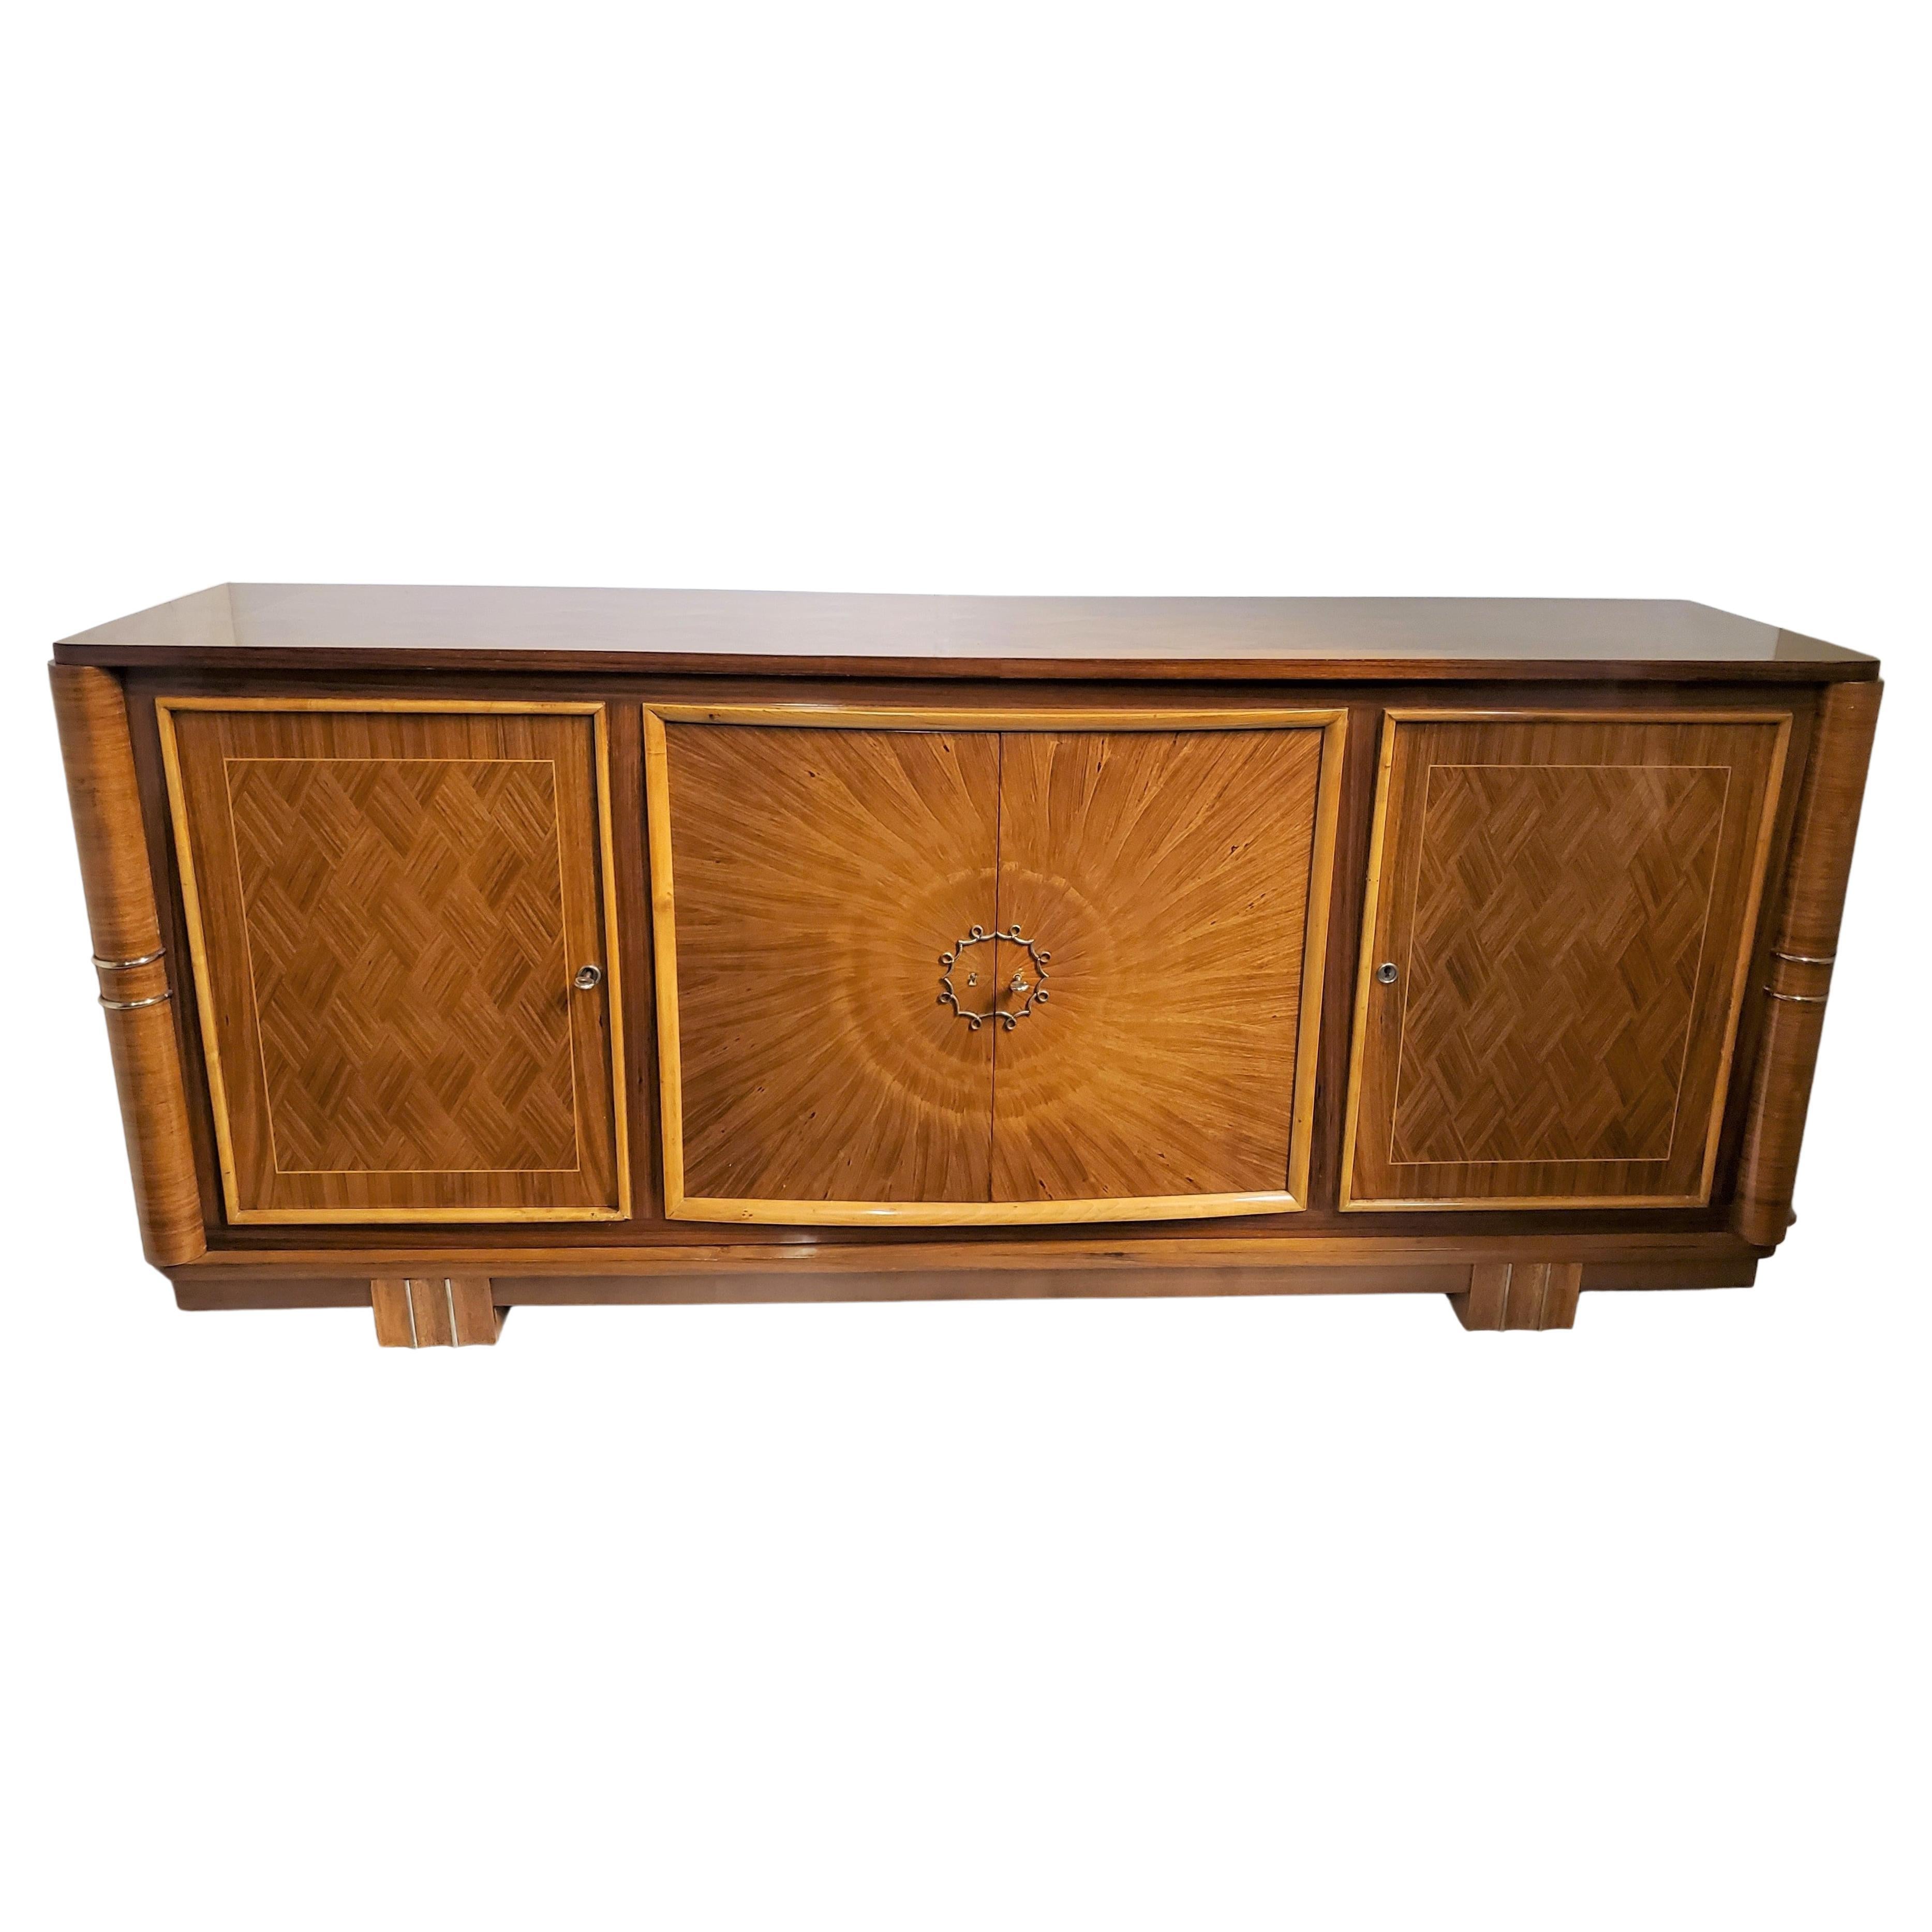 Fine French Parquetry and Marquetry Inlaid Sunburst Cabinet Att to Lucien Rollin For Sale